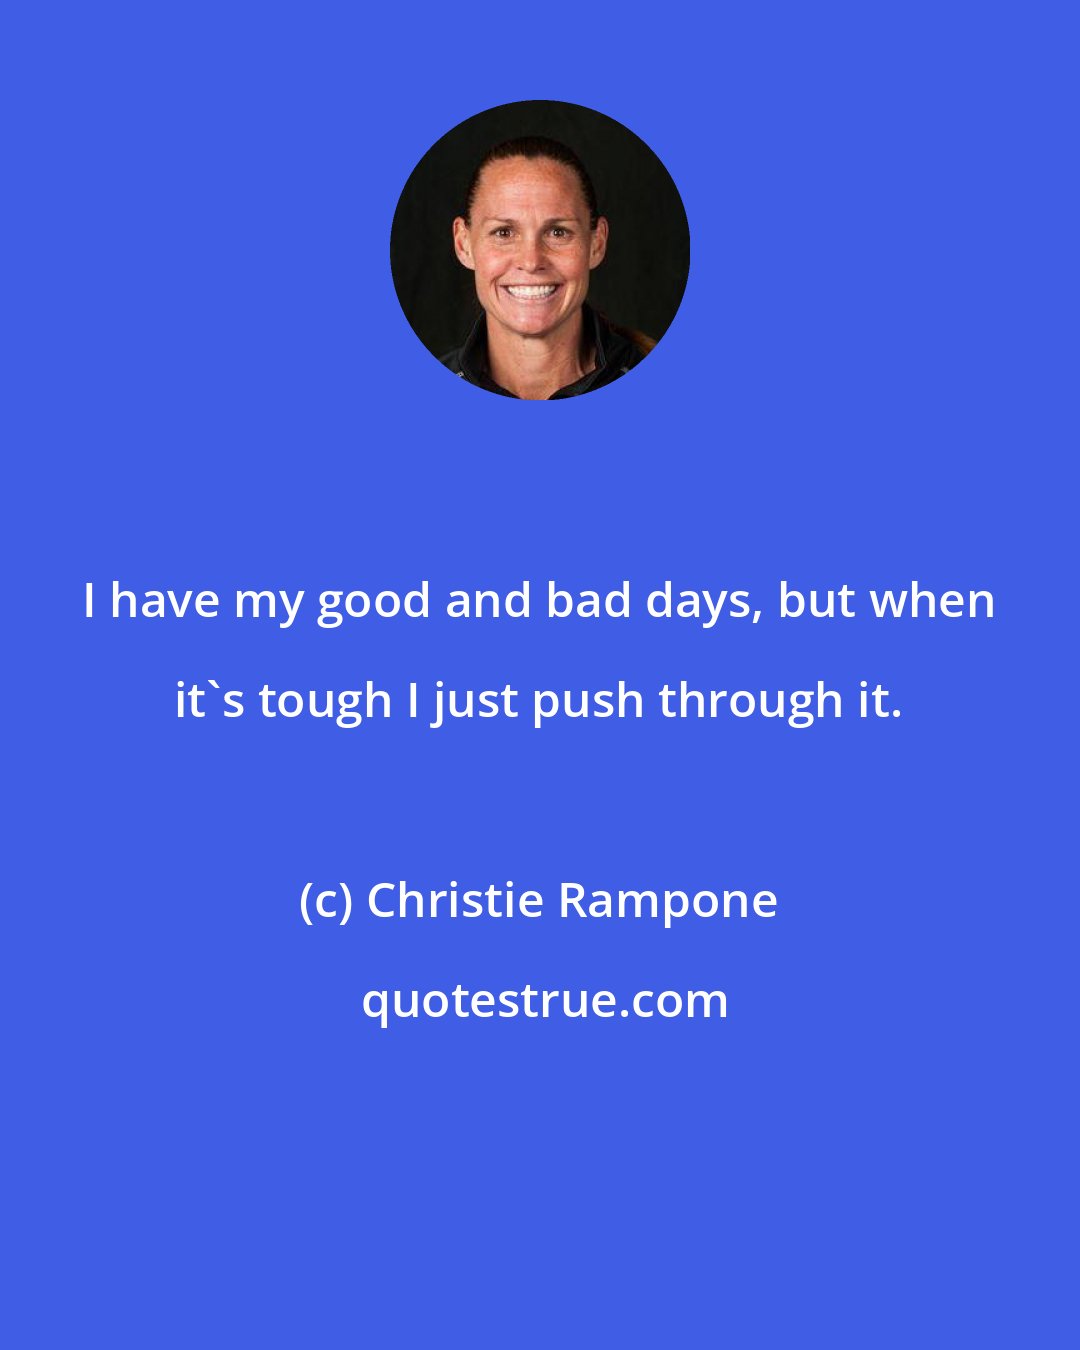 Christie Rampone: I have my good and bad days, but when it's tough I just push through it.